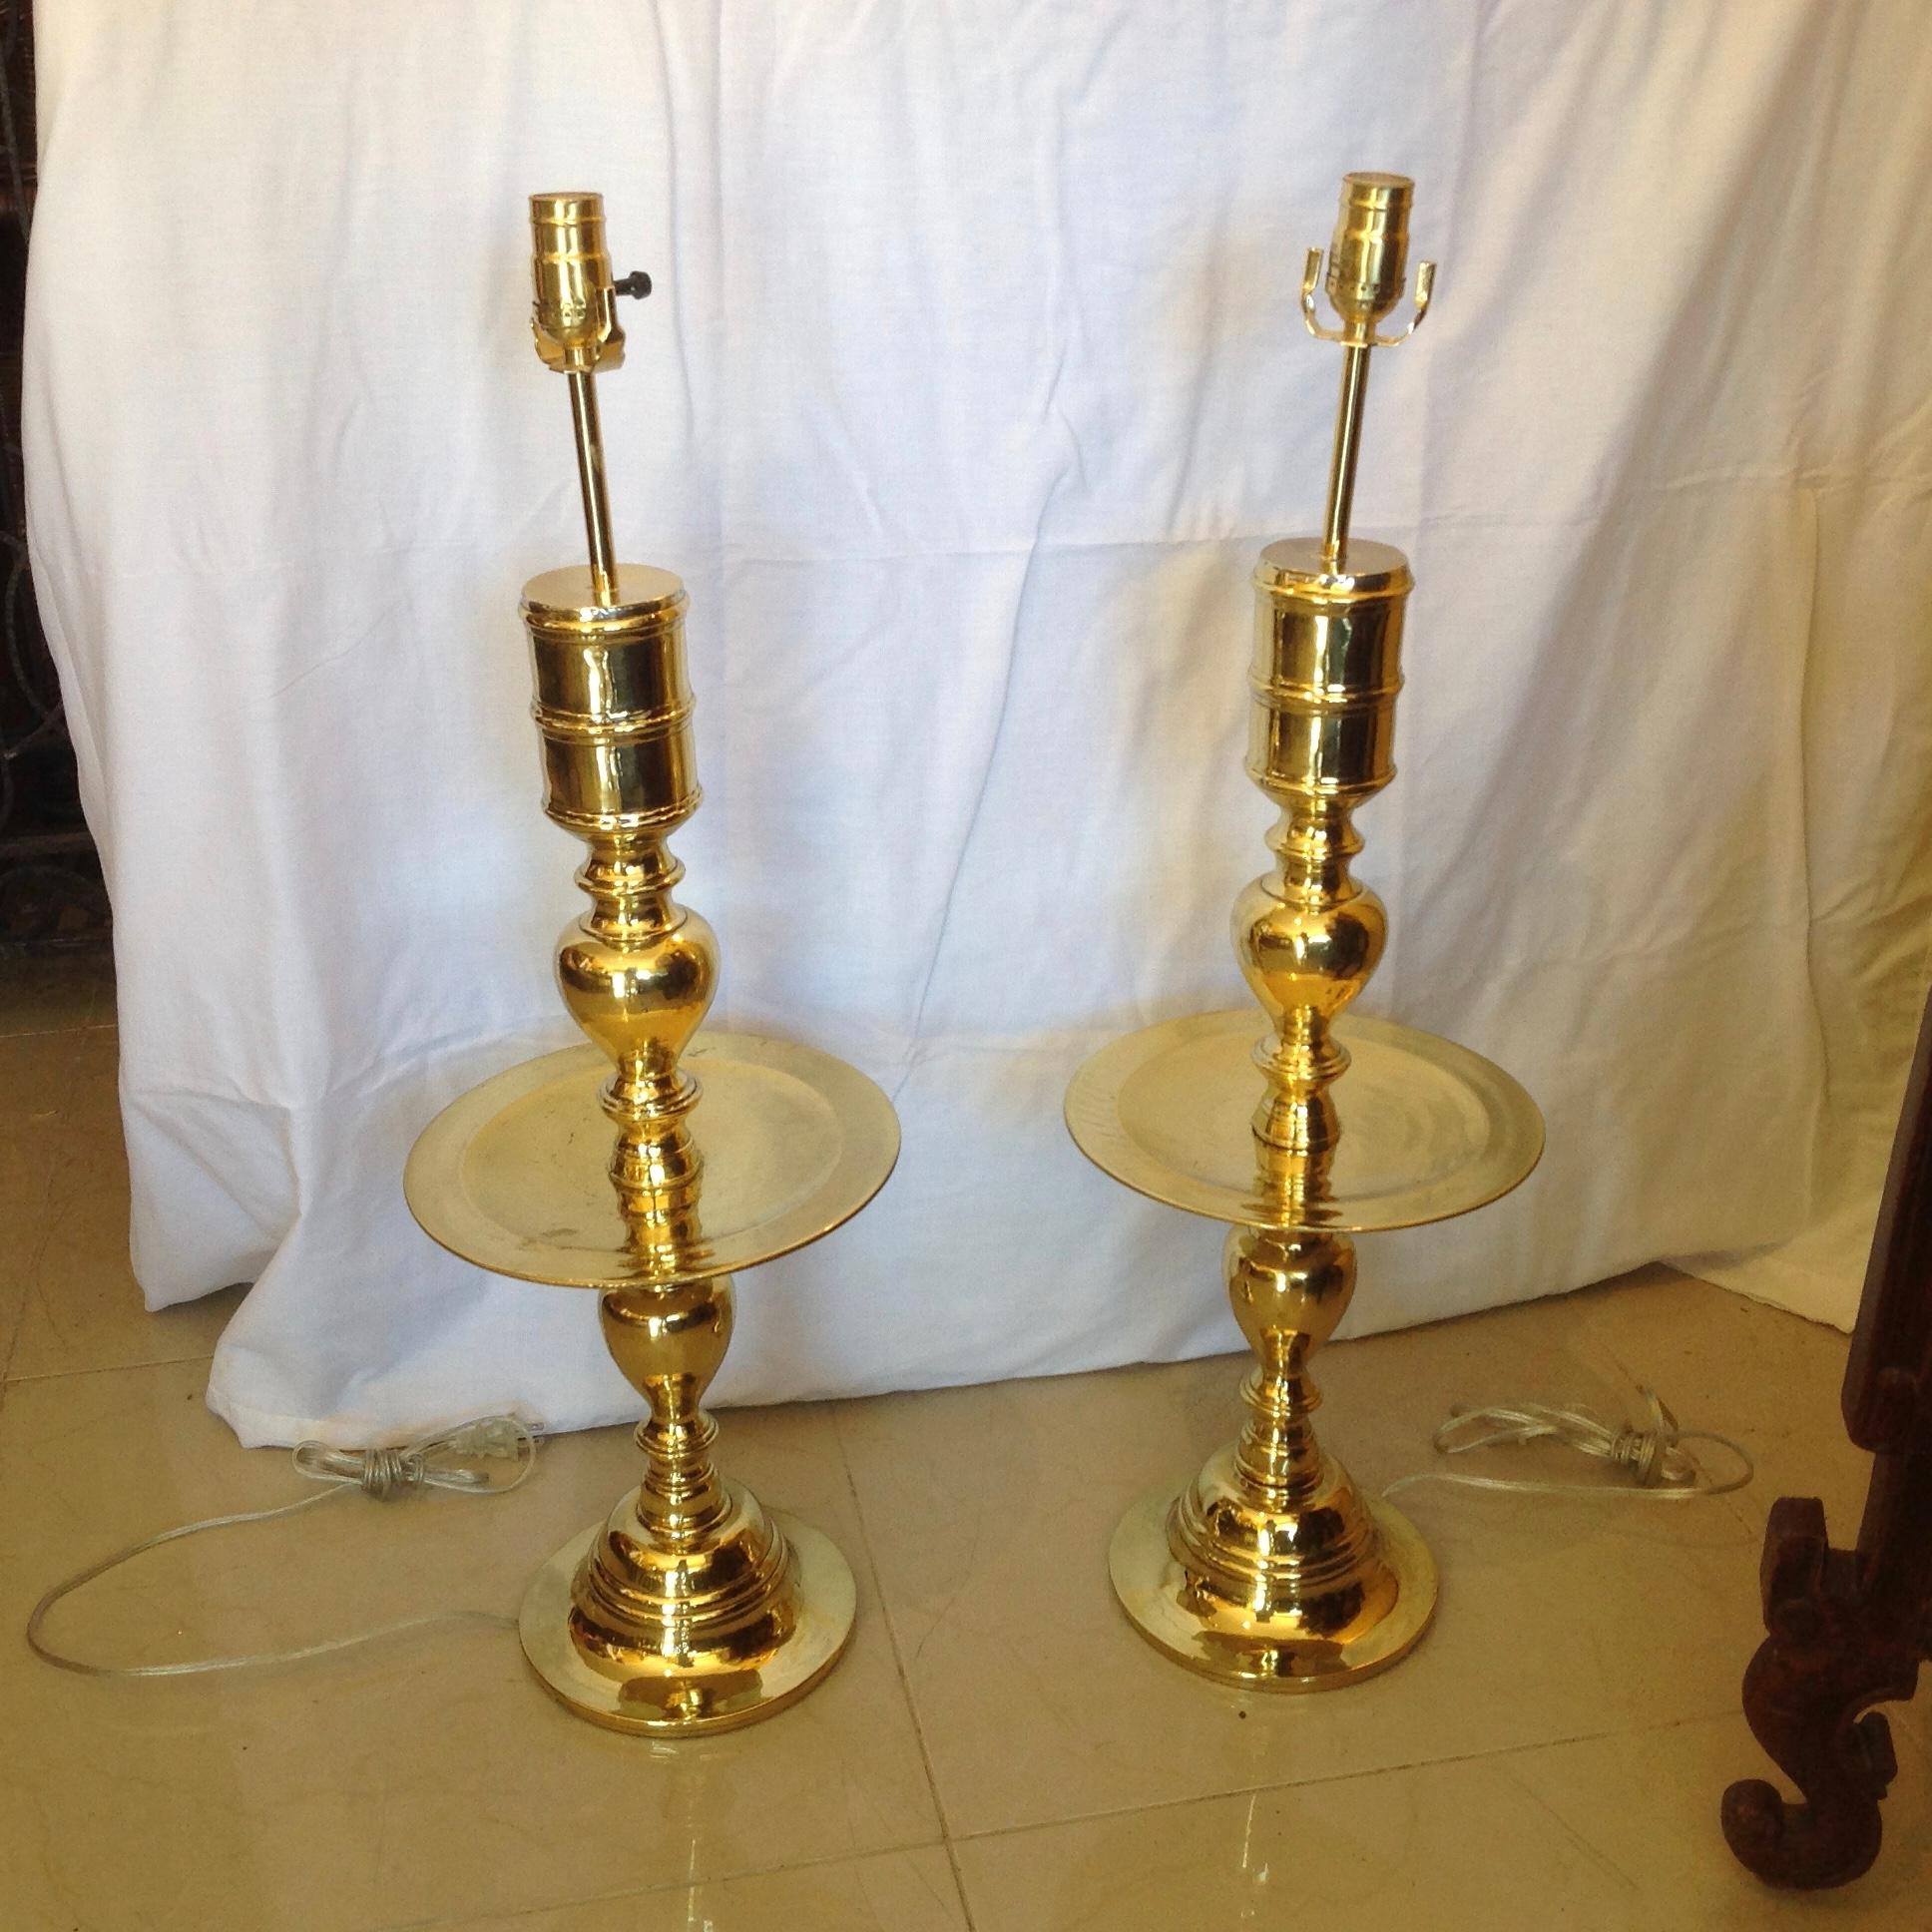 Fashioned from brass candlesticks - highly polished gleaming pair of unusual lamps.